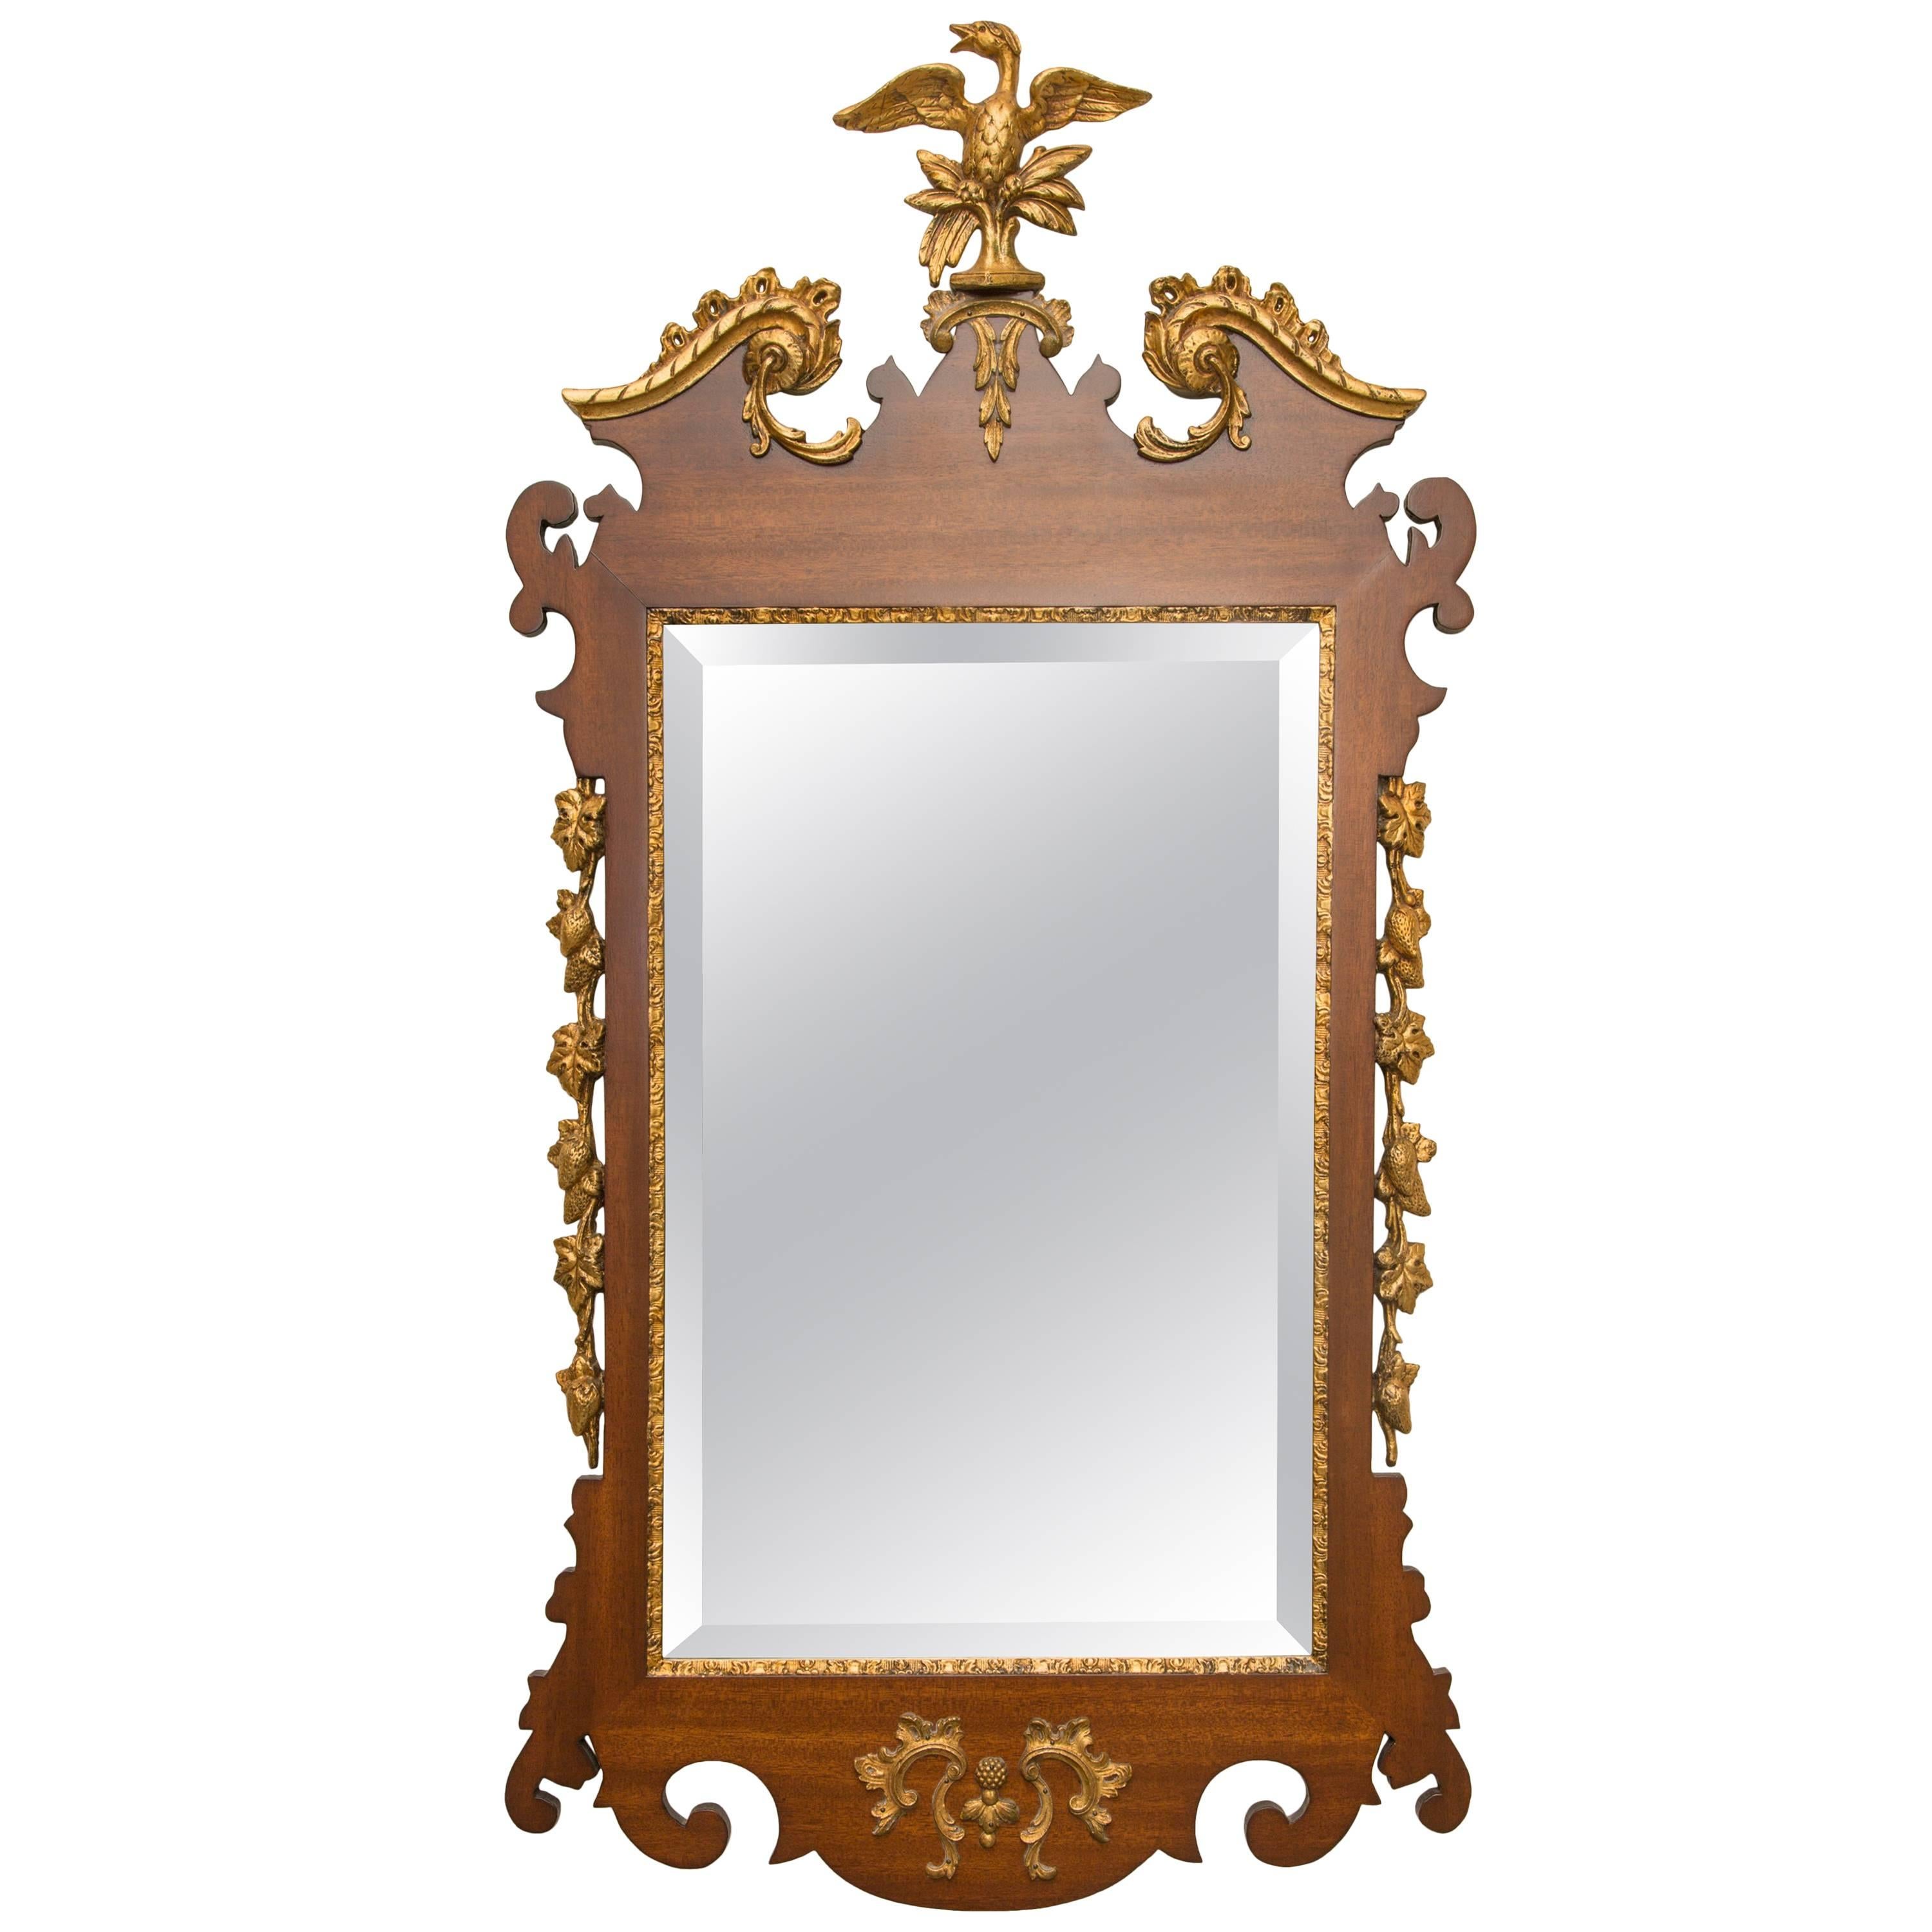 Mahogany and Parcel-Gilt George II Style Mirrors